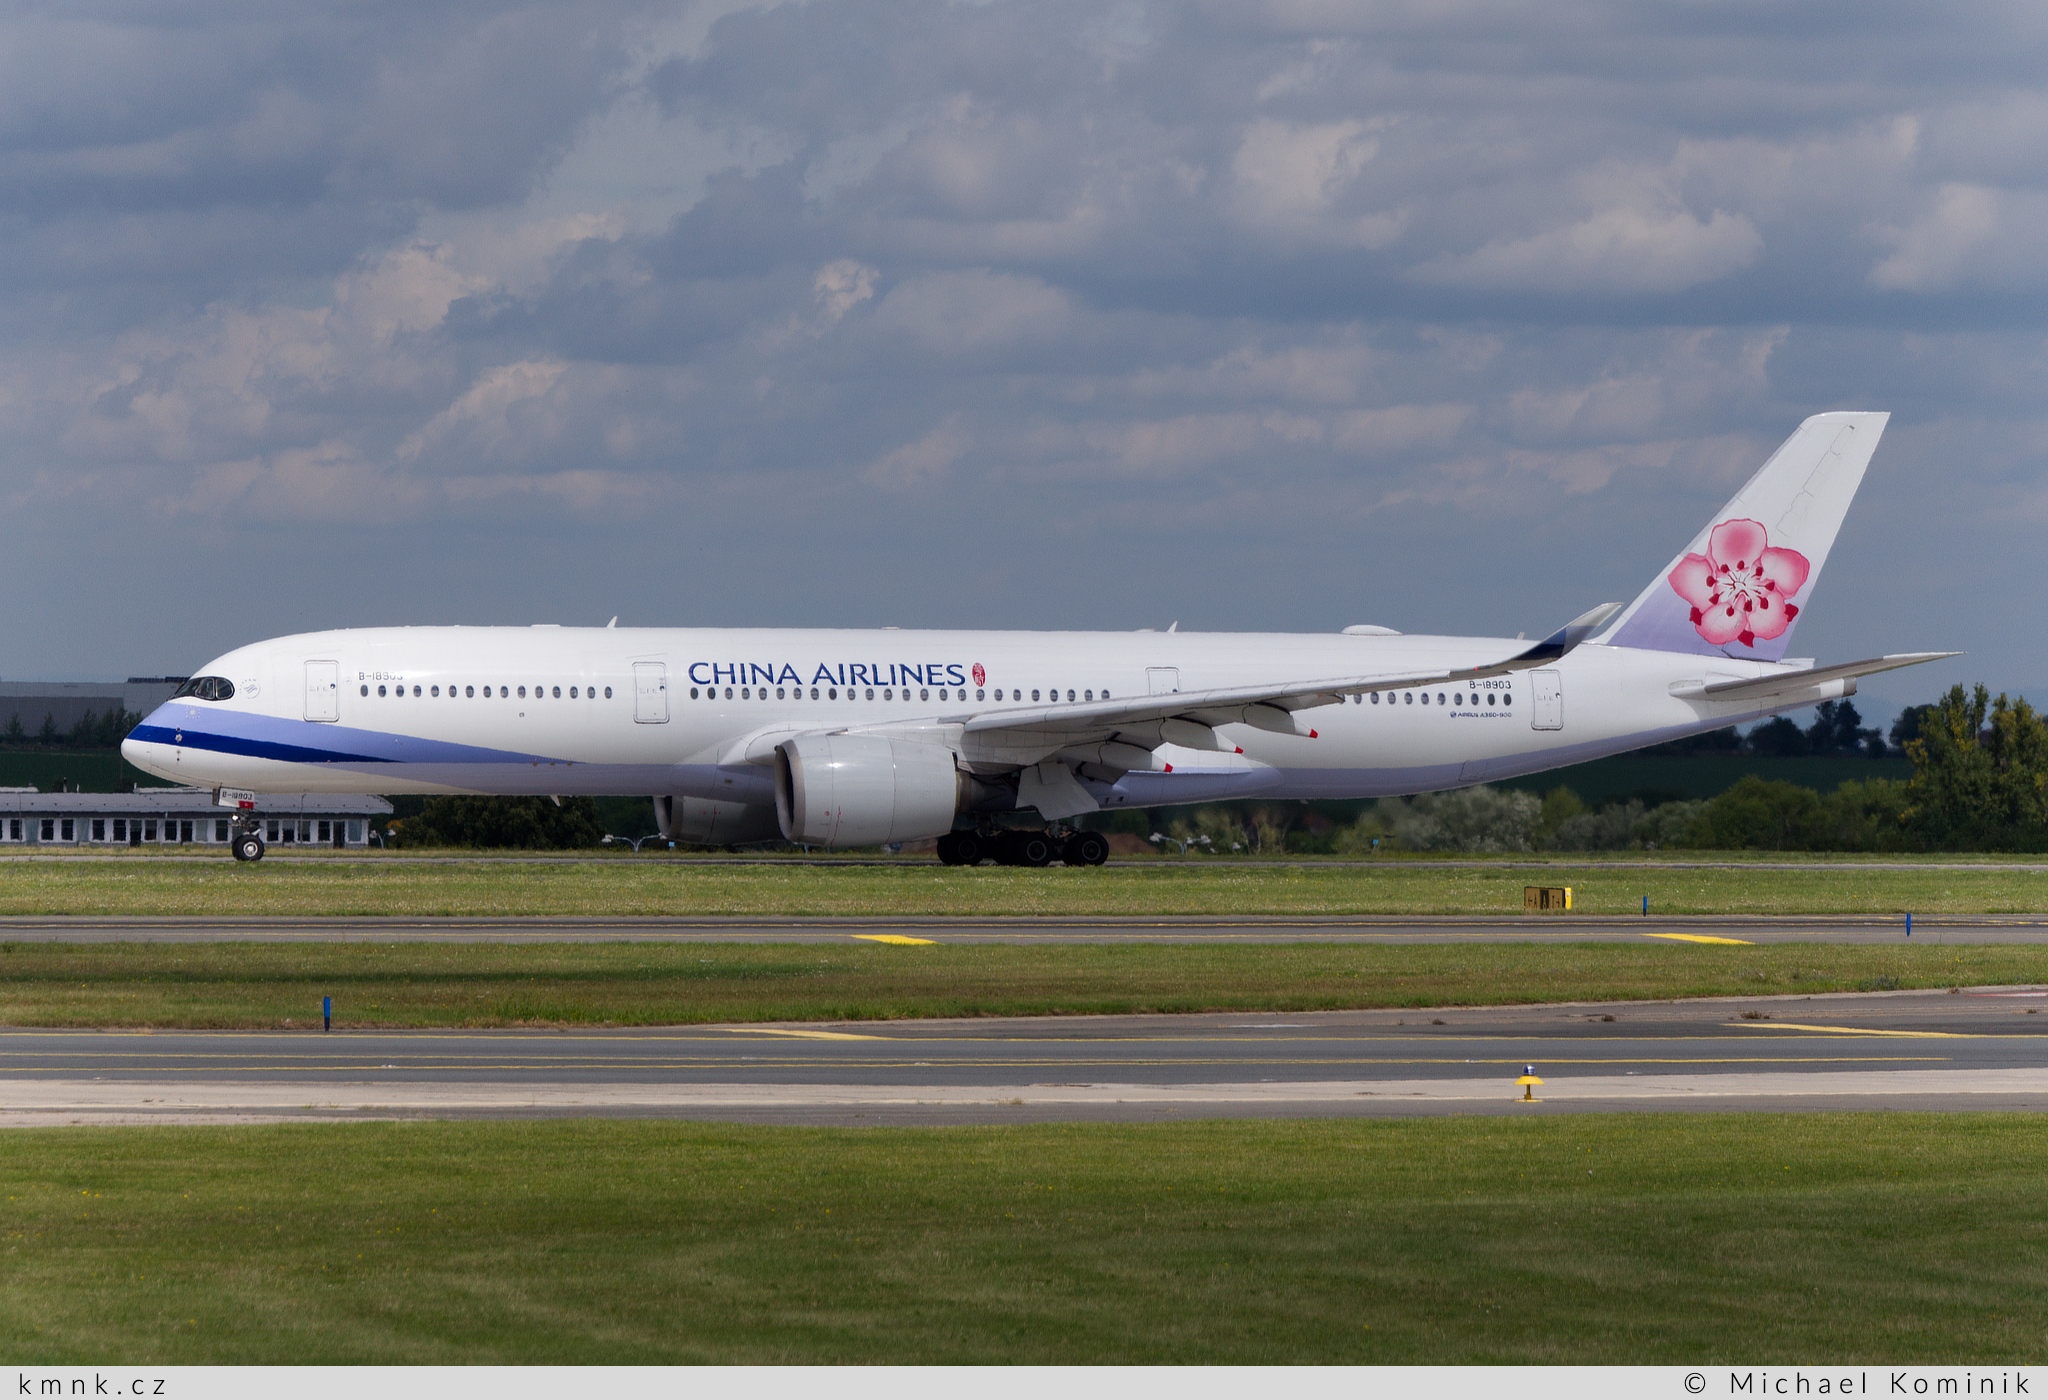 China Airlines | Airbus A350-941 | B-18903